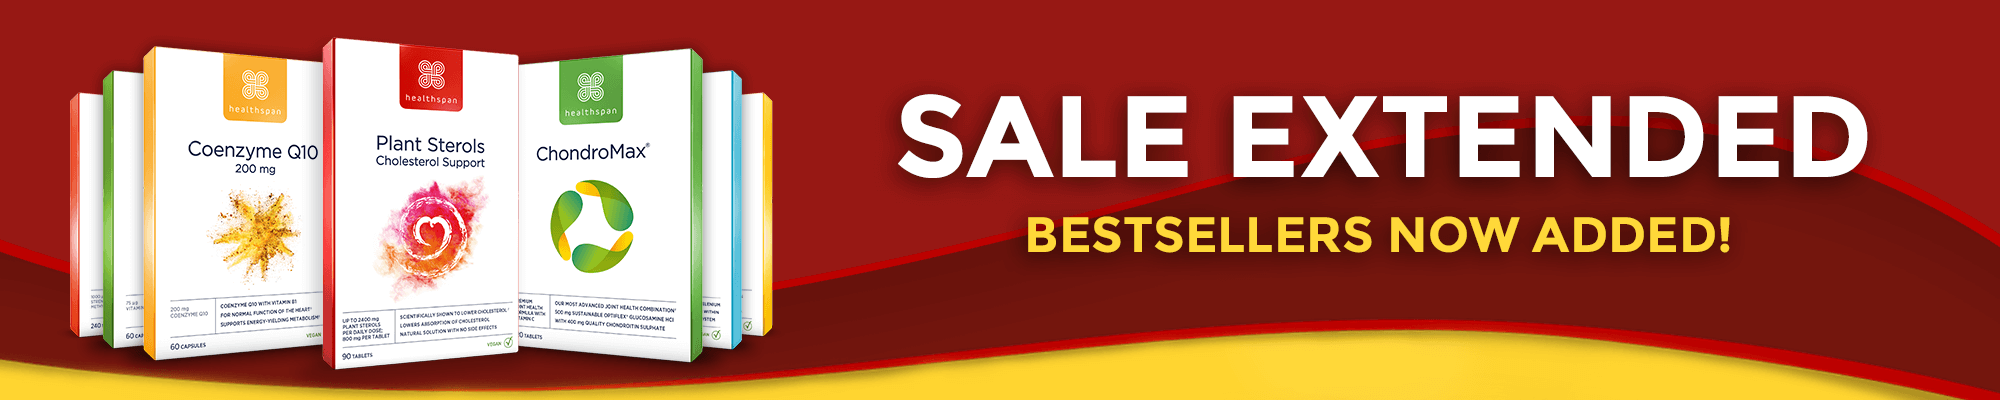 Sale extended, bestsellers now added!